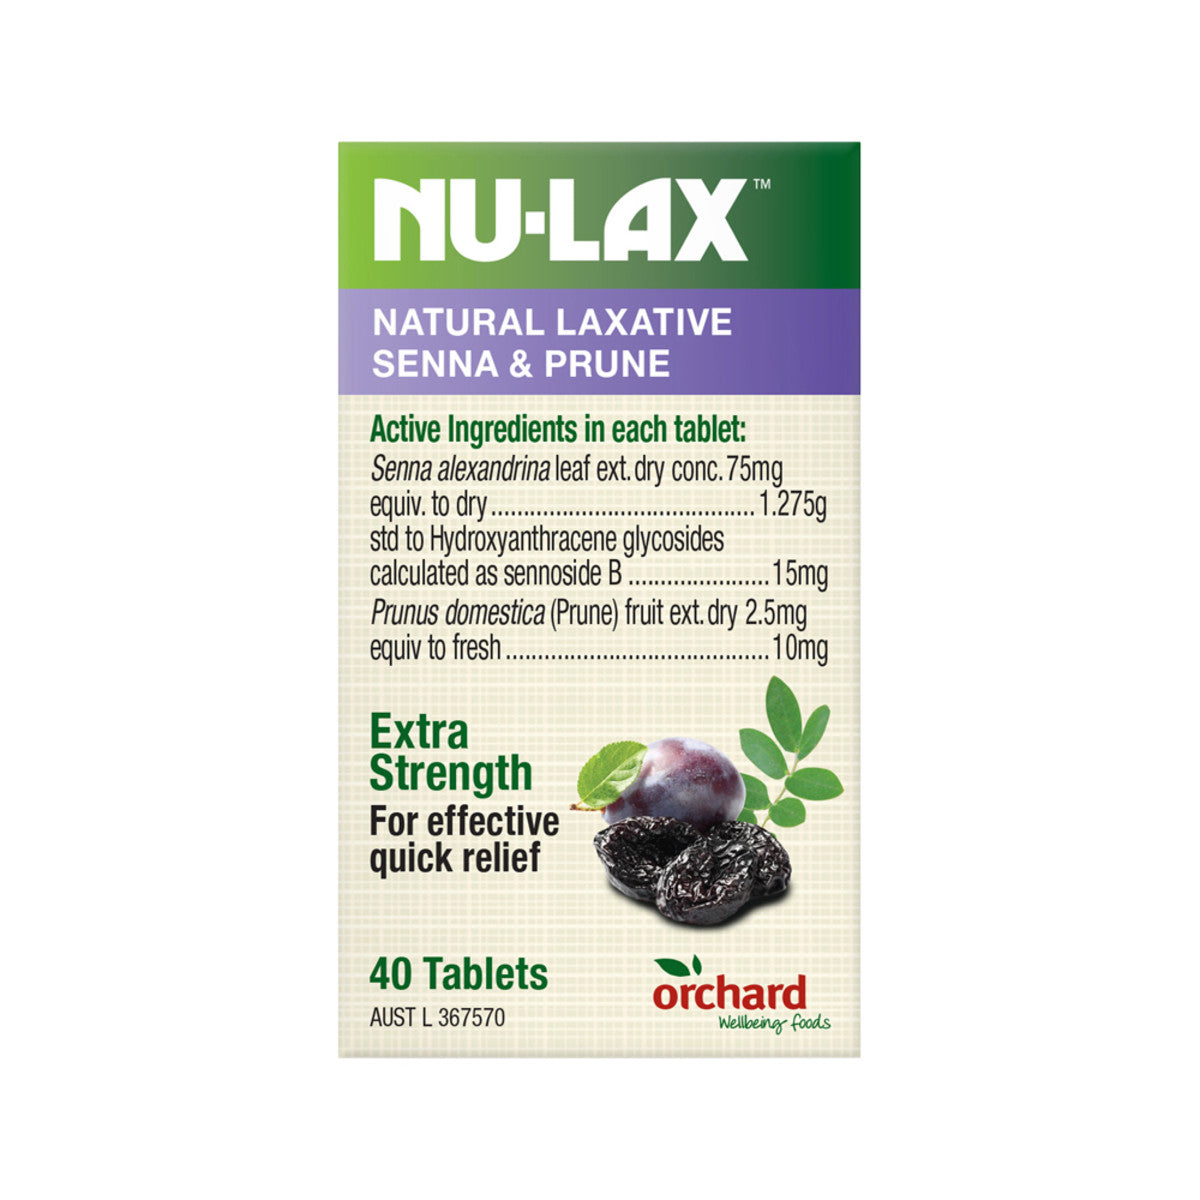 NuLax Natural Laxative Extra Strength Senna and Prunes 40t